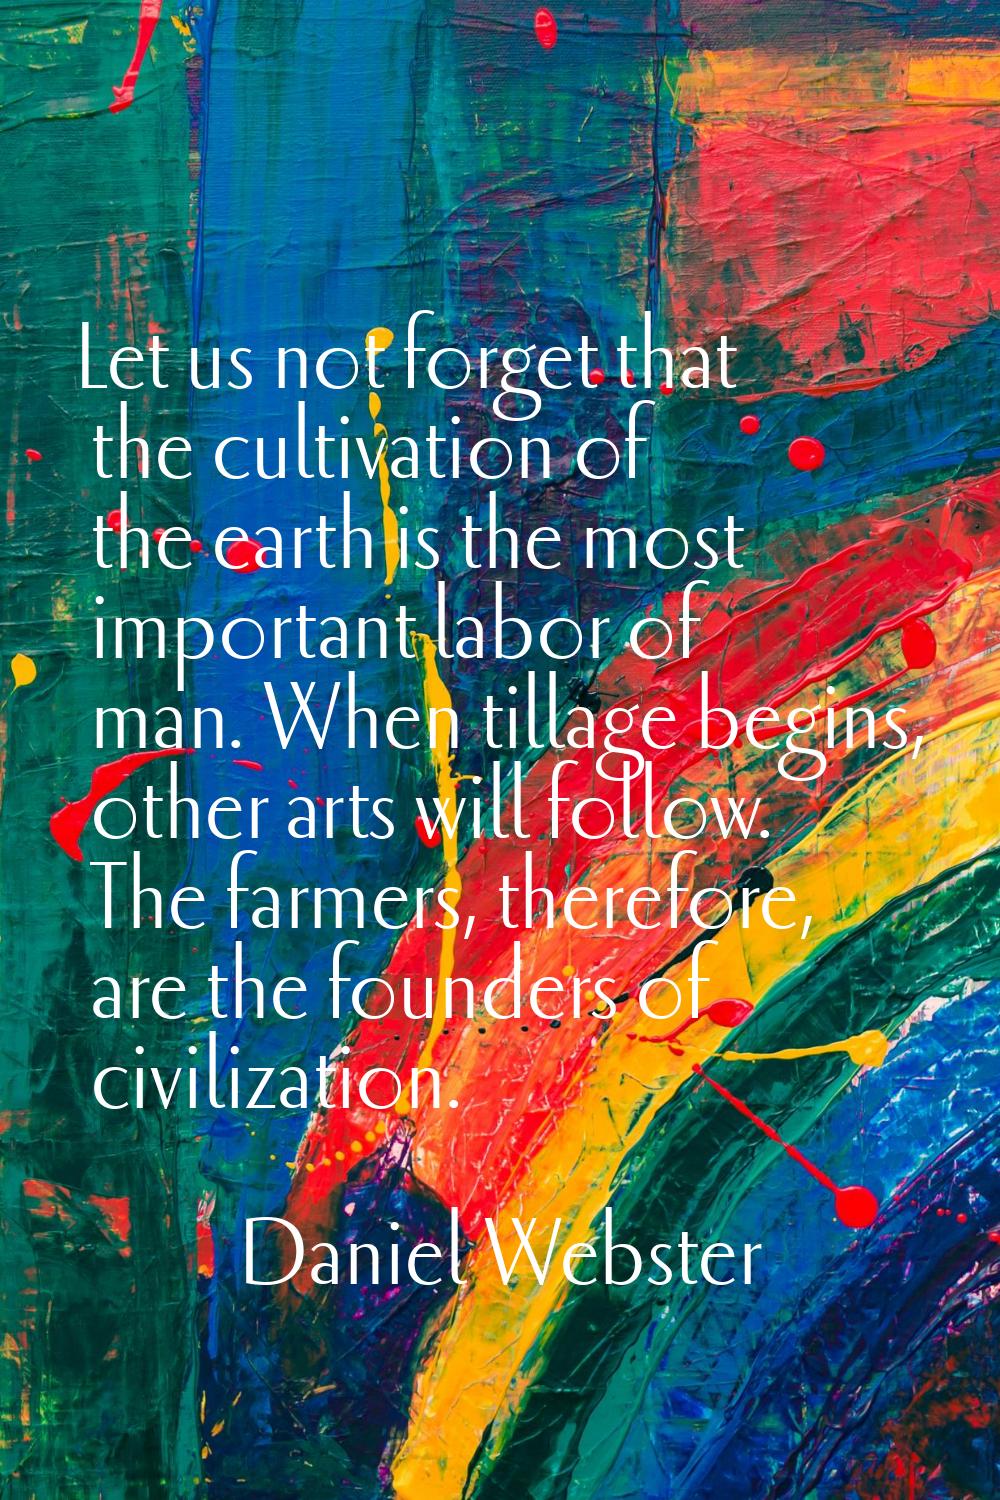 Let us not forget that the cultivation of the earth is the most important labor of man. When tillag